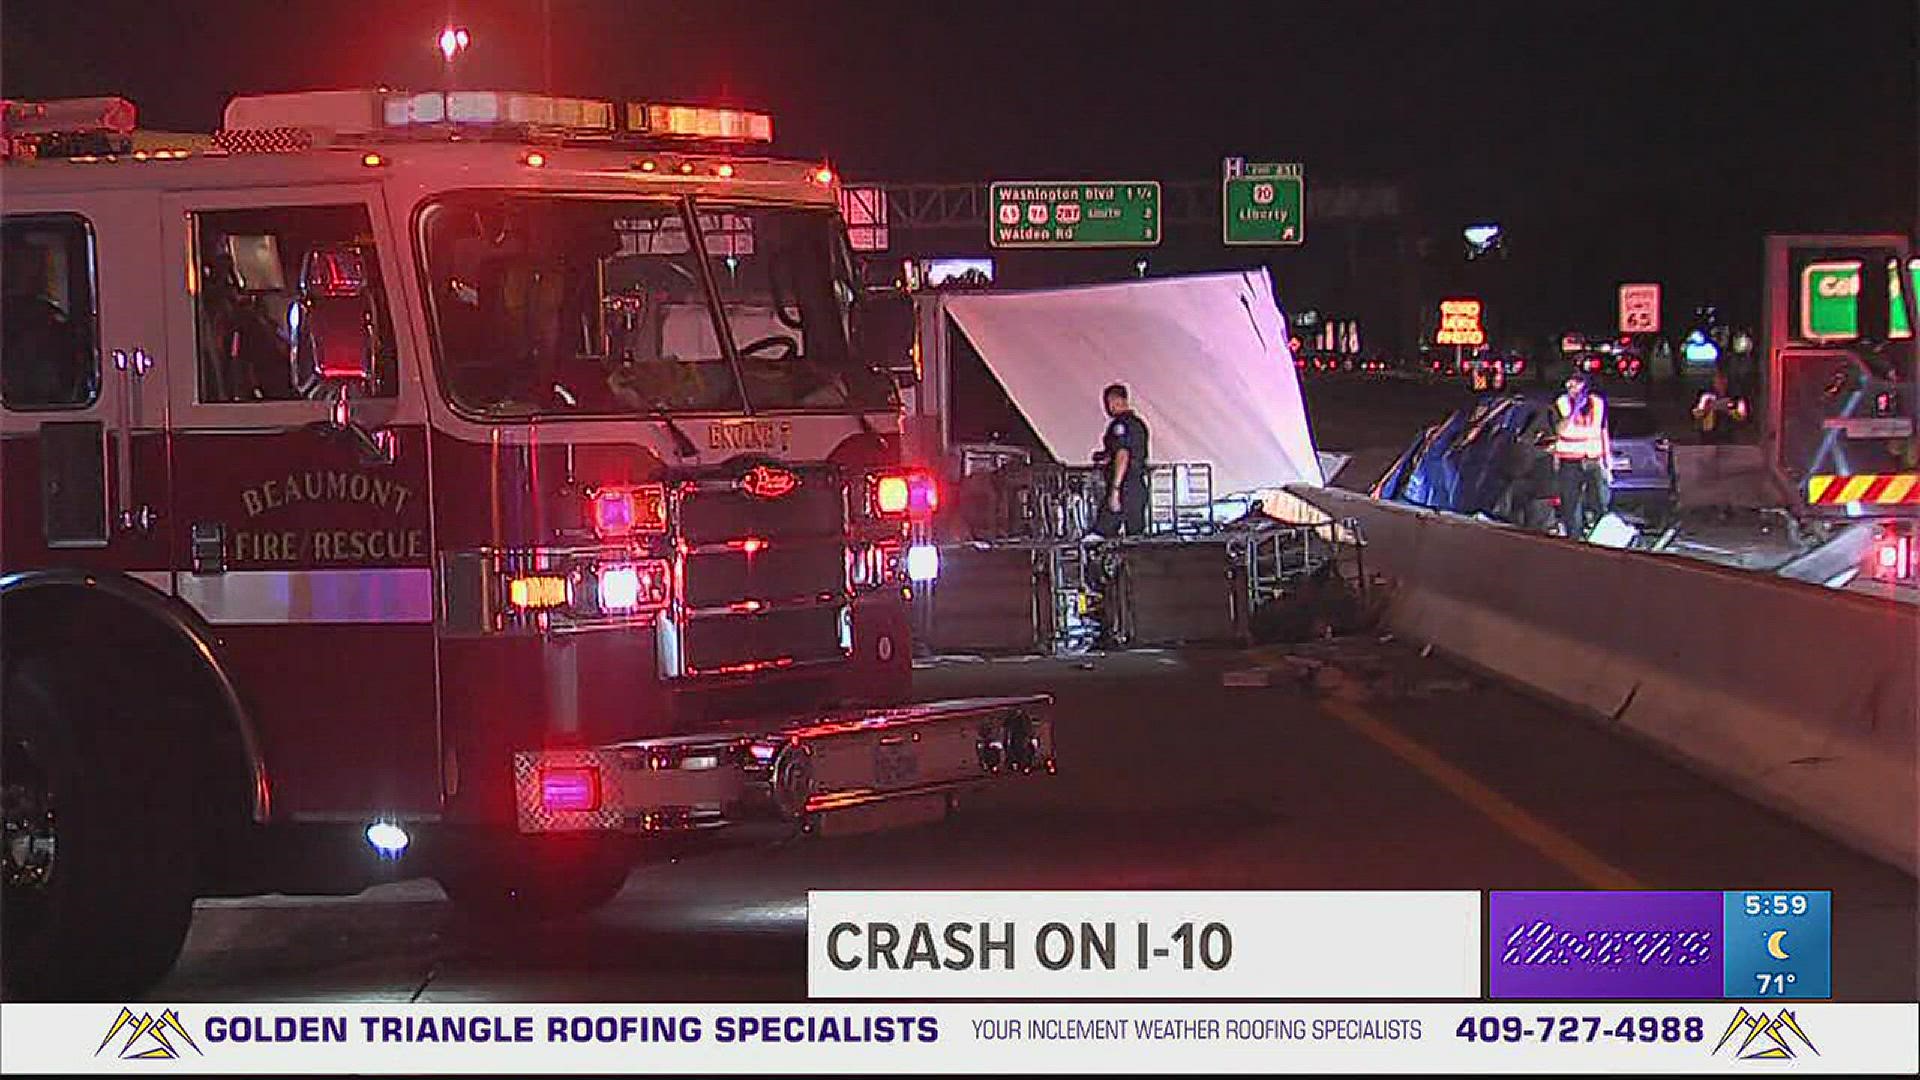 The 18-wheeler struck the center divider and knocked it into the westbound lanes.